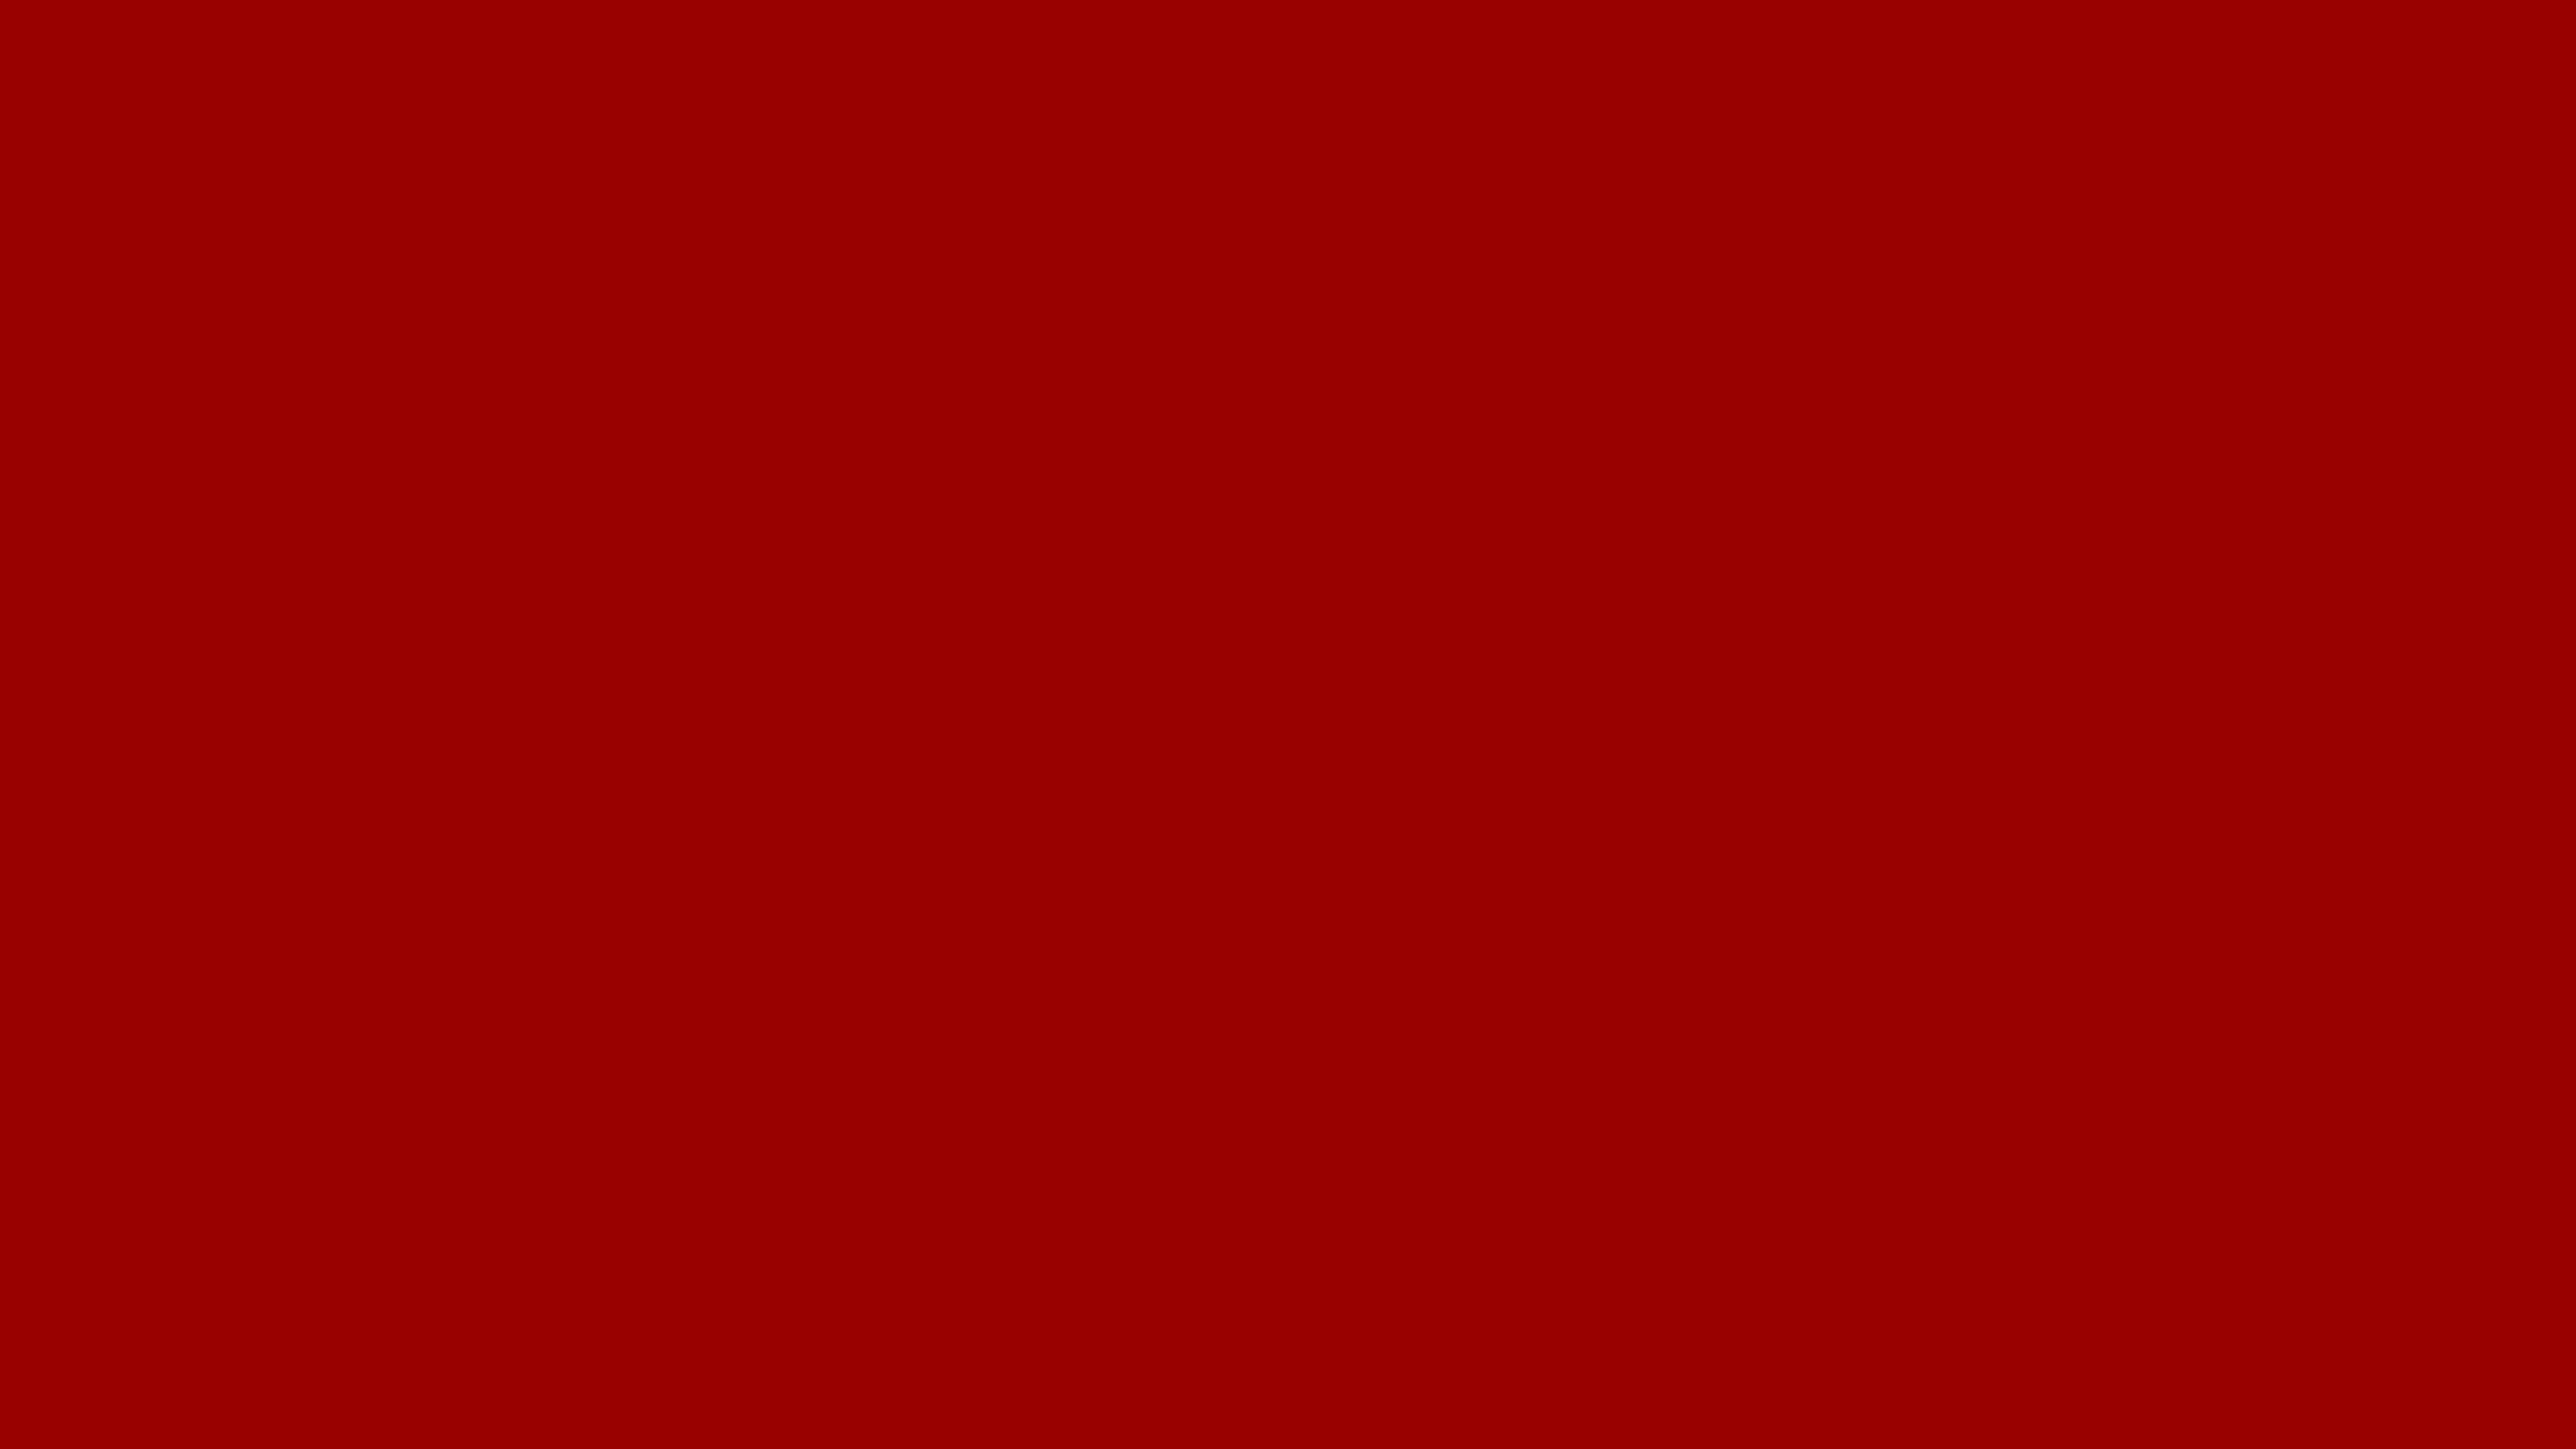 7680x4320 USC Cardinal Solid Color Background